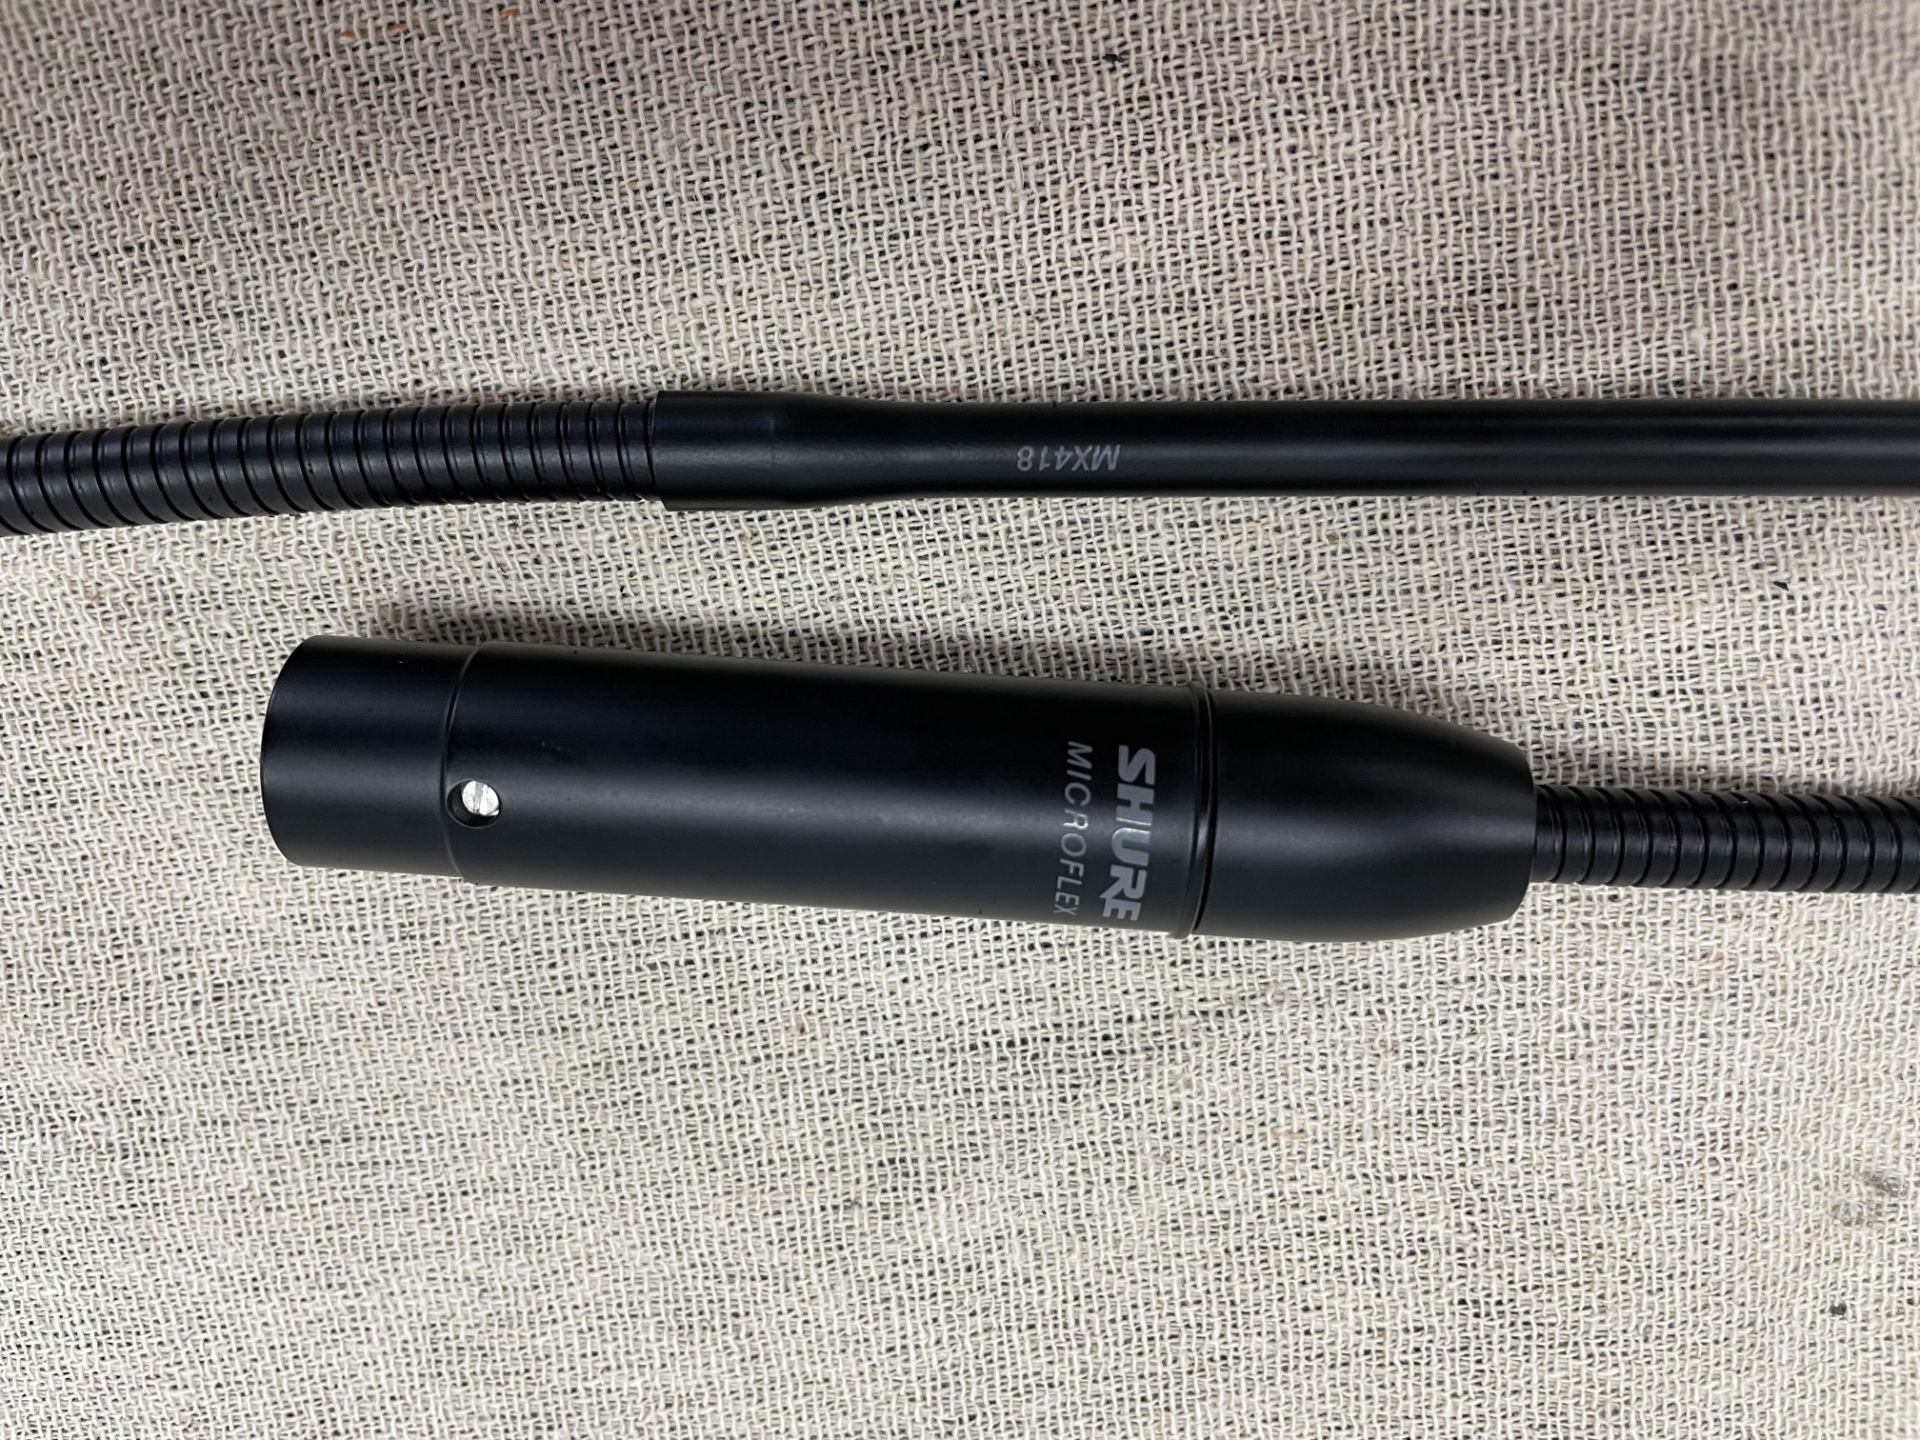 2 Shure MX418 Gooseneck Condenser Microphones with R185 Cartridge (excellent condition)-located at - Image 3 of 3